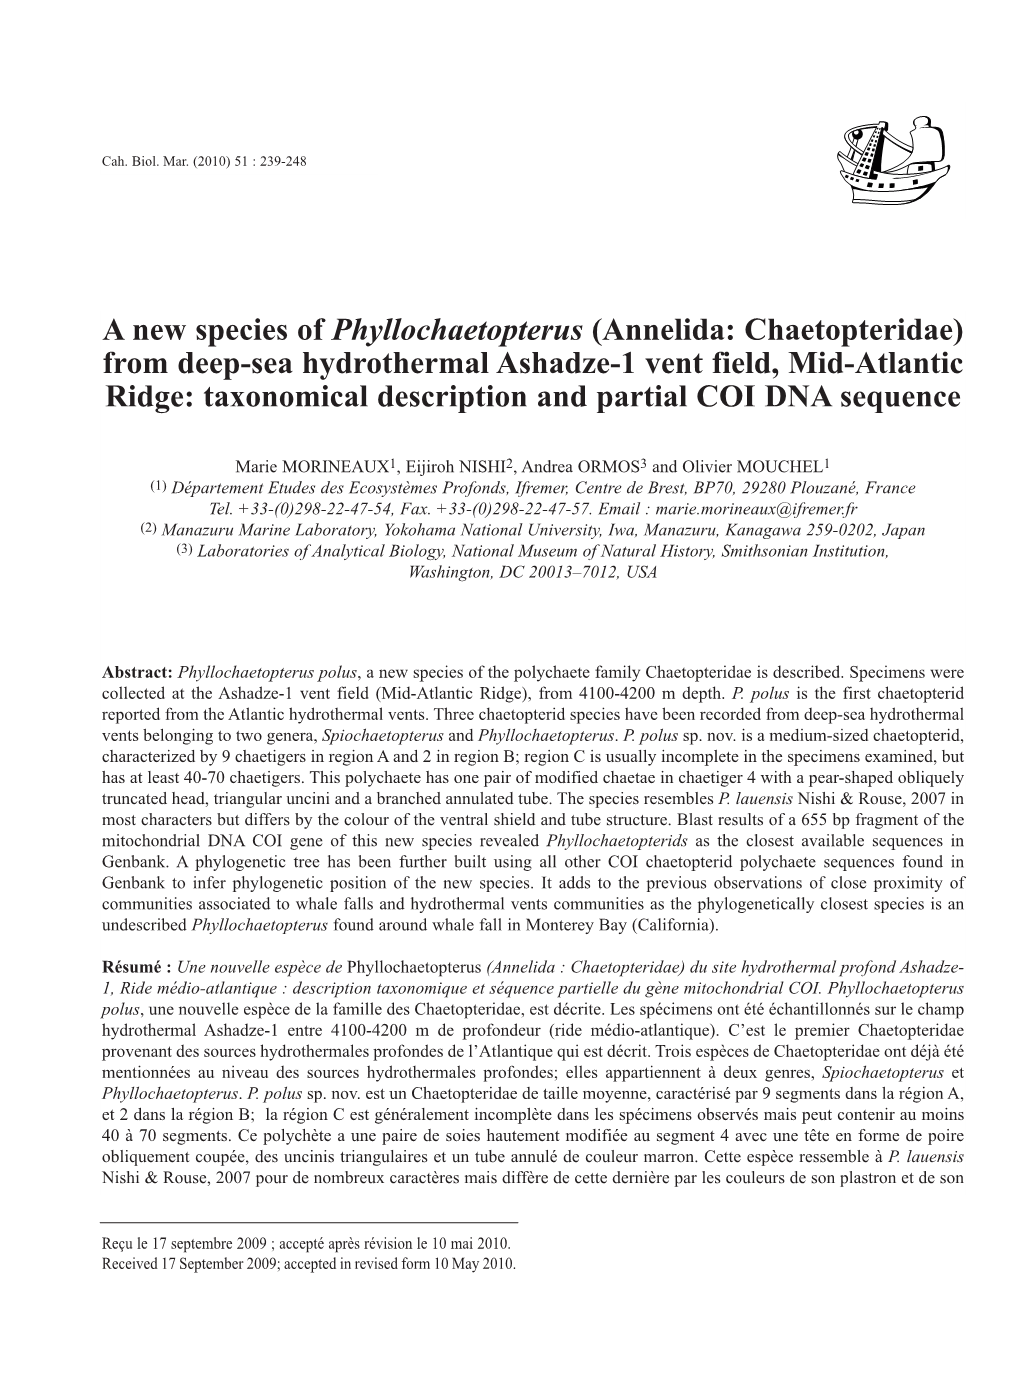 Annelida: Chaetopteridae) from Deep-Sea Hydrothermal Ashadze-1 Vent Field, Mid-Atlantic Ridge: Taxonomical Description and Partial COI DNA Sequence